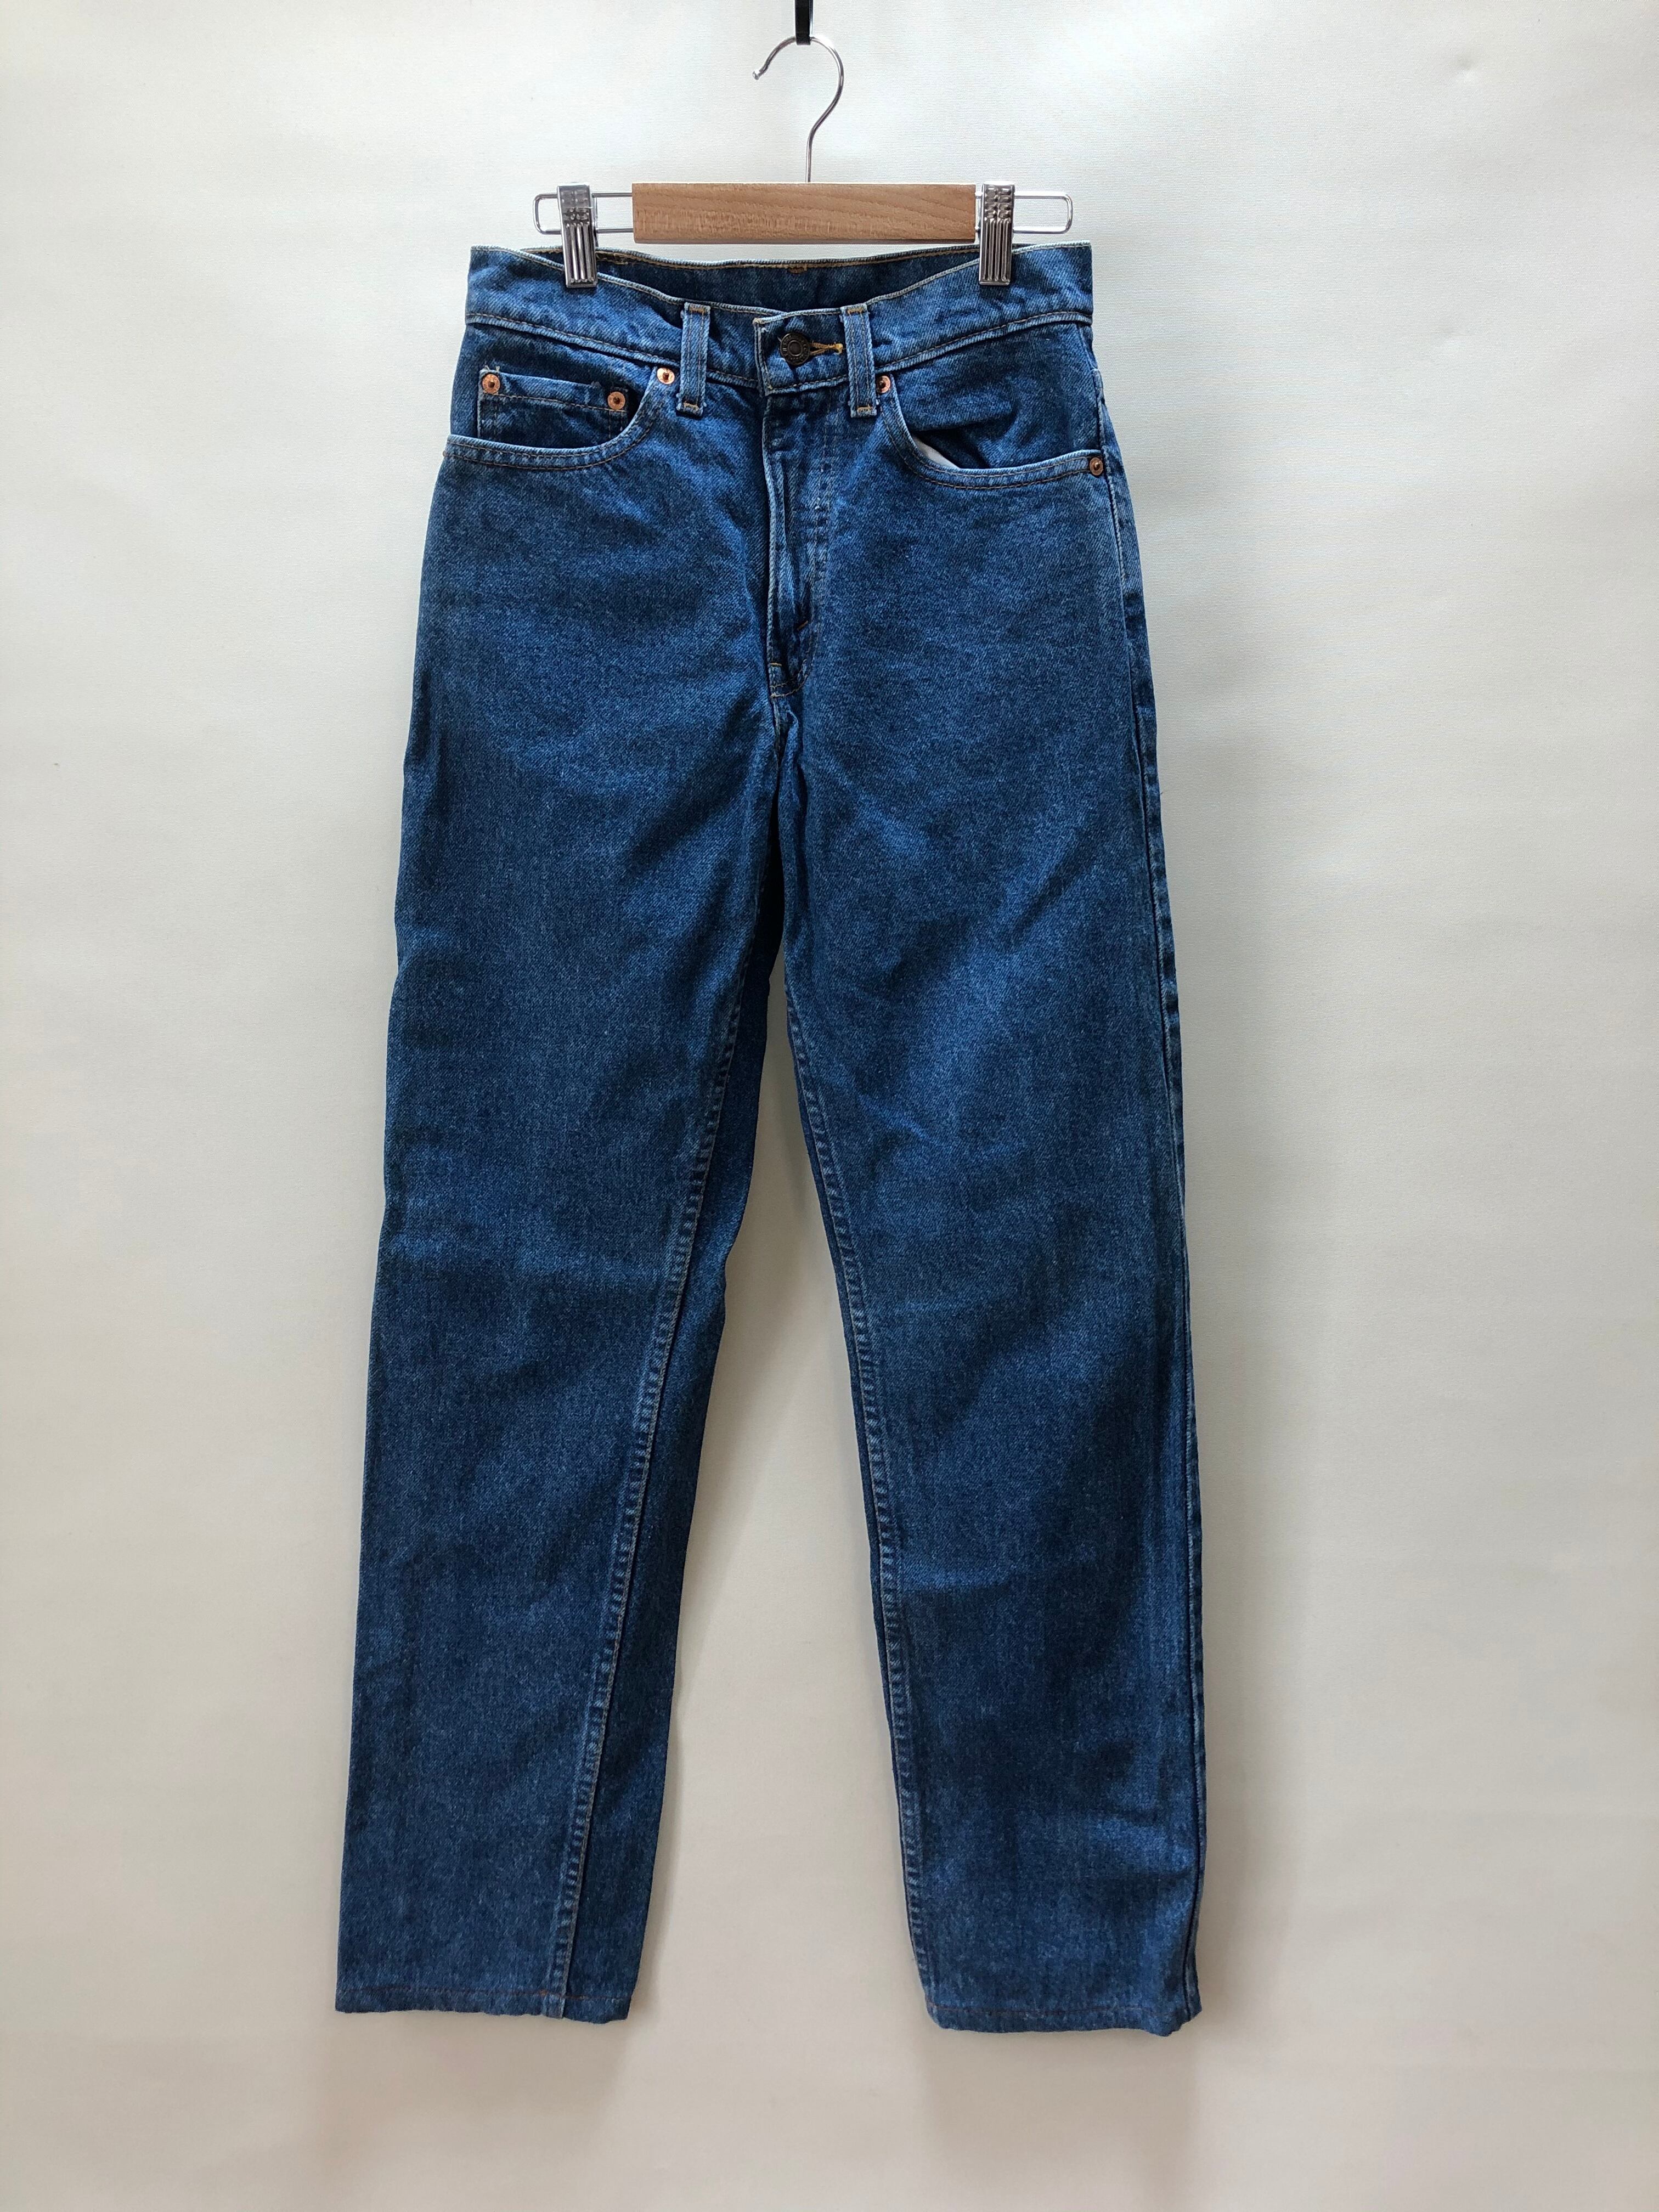 W27 90's MADE in USA LEVI'Sリーバイス 510 404